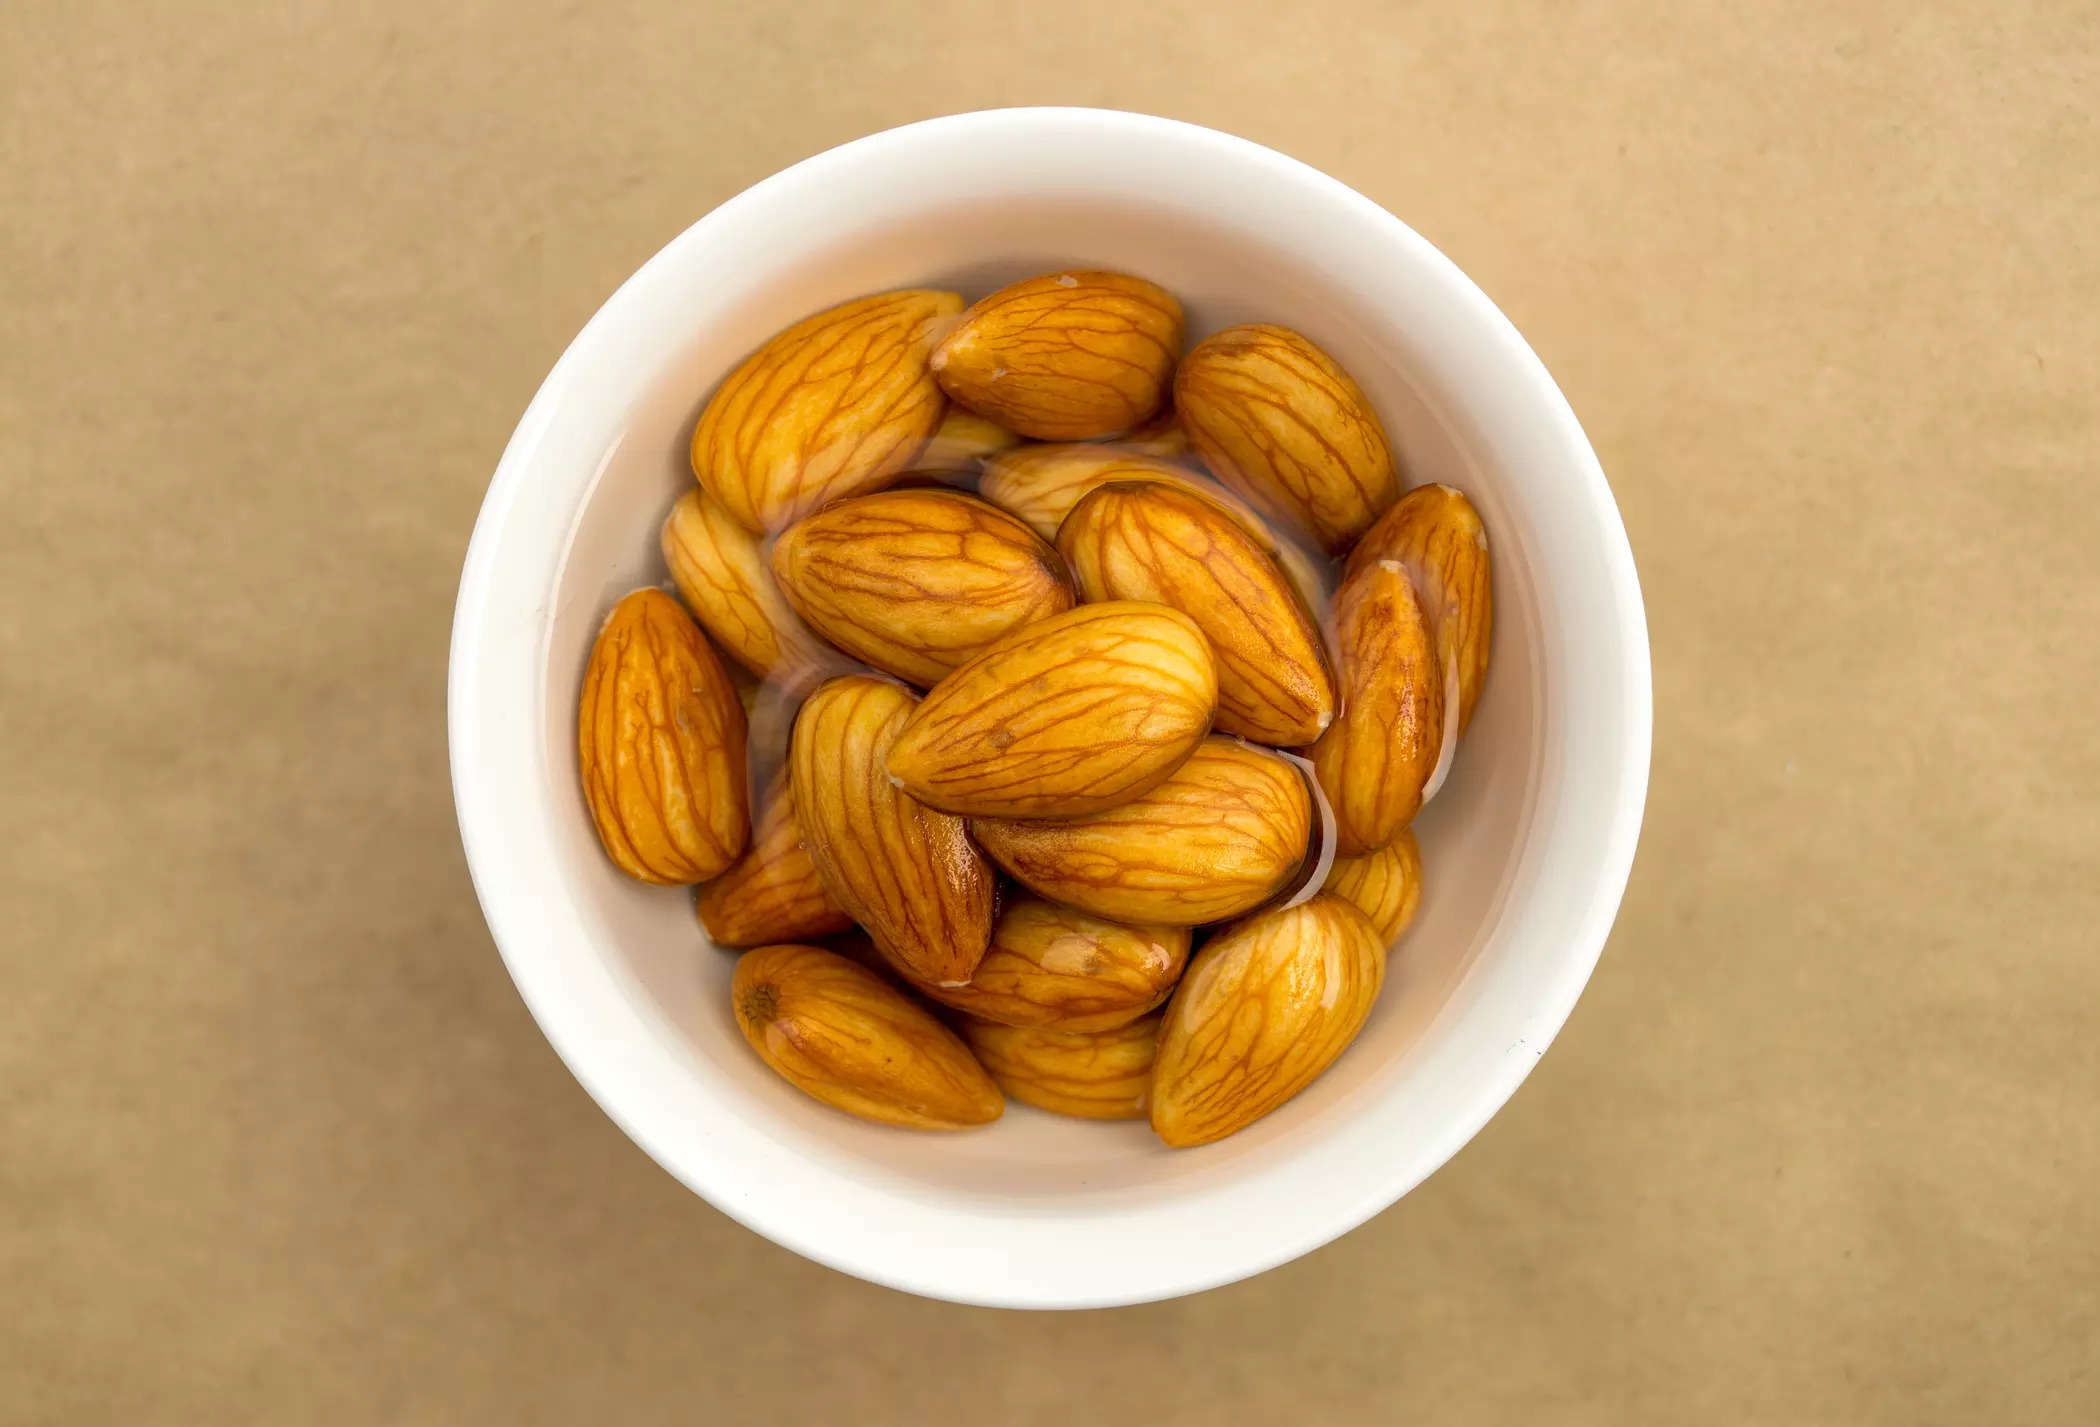 Granny was right - Starting the day with soaked almonds and healthy fats could be a boon for health